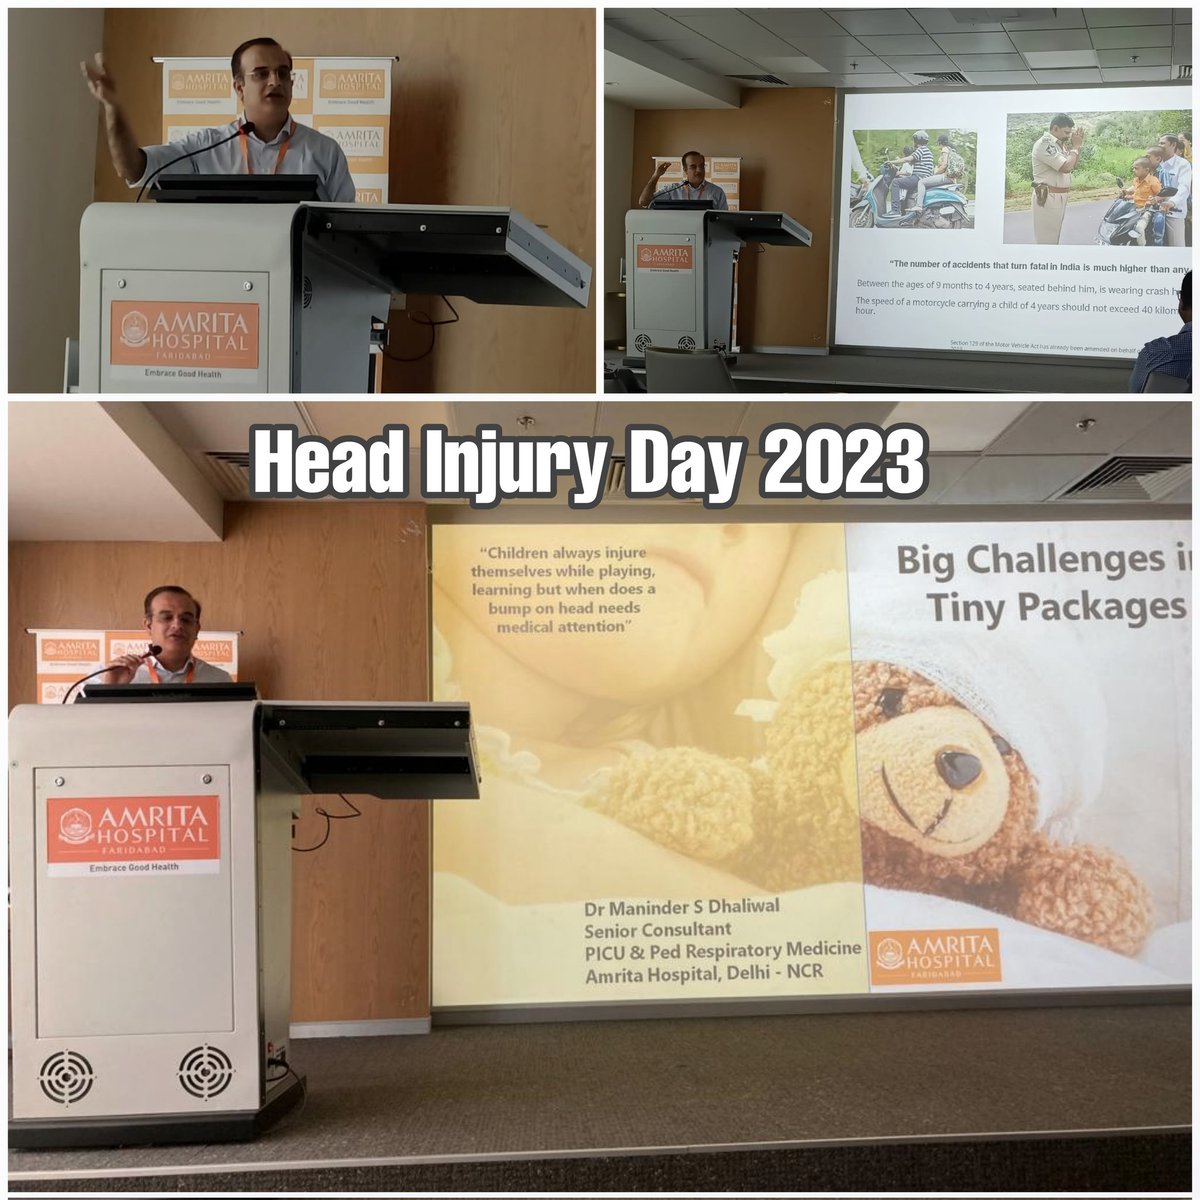 Bigger challenges in small packages. Prevent pediatric #head #injury #PedsICU. Wear the correct helmet for children. Remember to check  6 S : Size, Snuggly fit, Space above eyes, Side strap fit, chin Strap fit, Safety standard helmet material. #Awareness #MoreThanMyBrainInjury